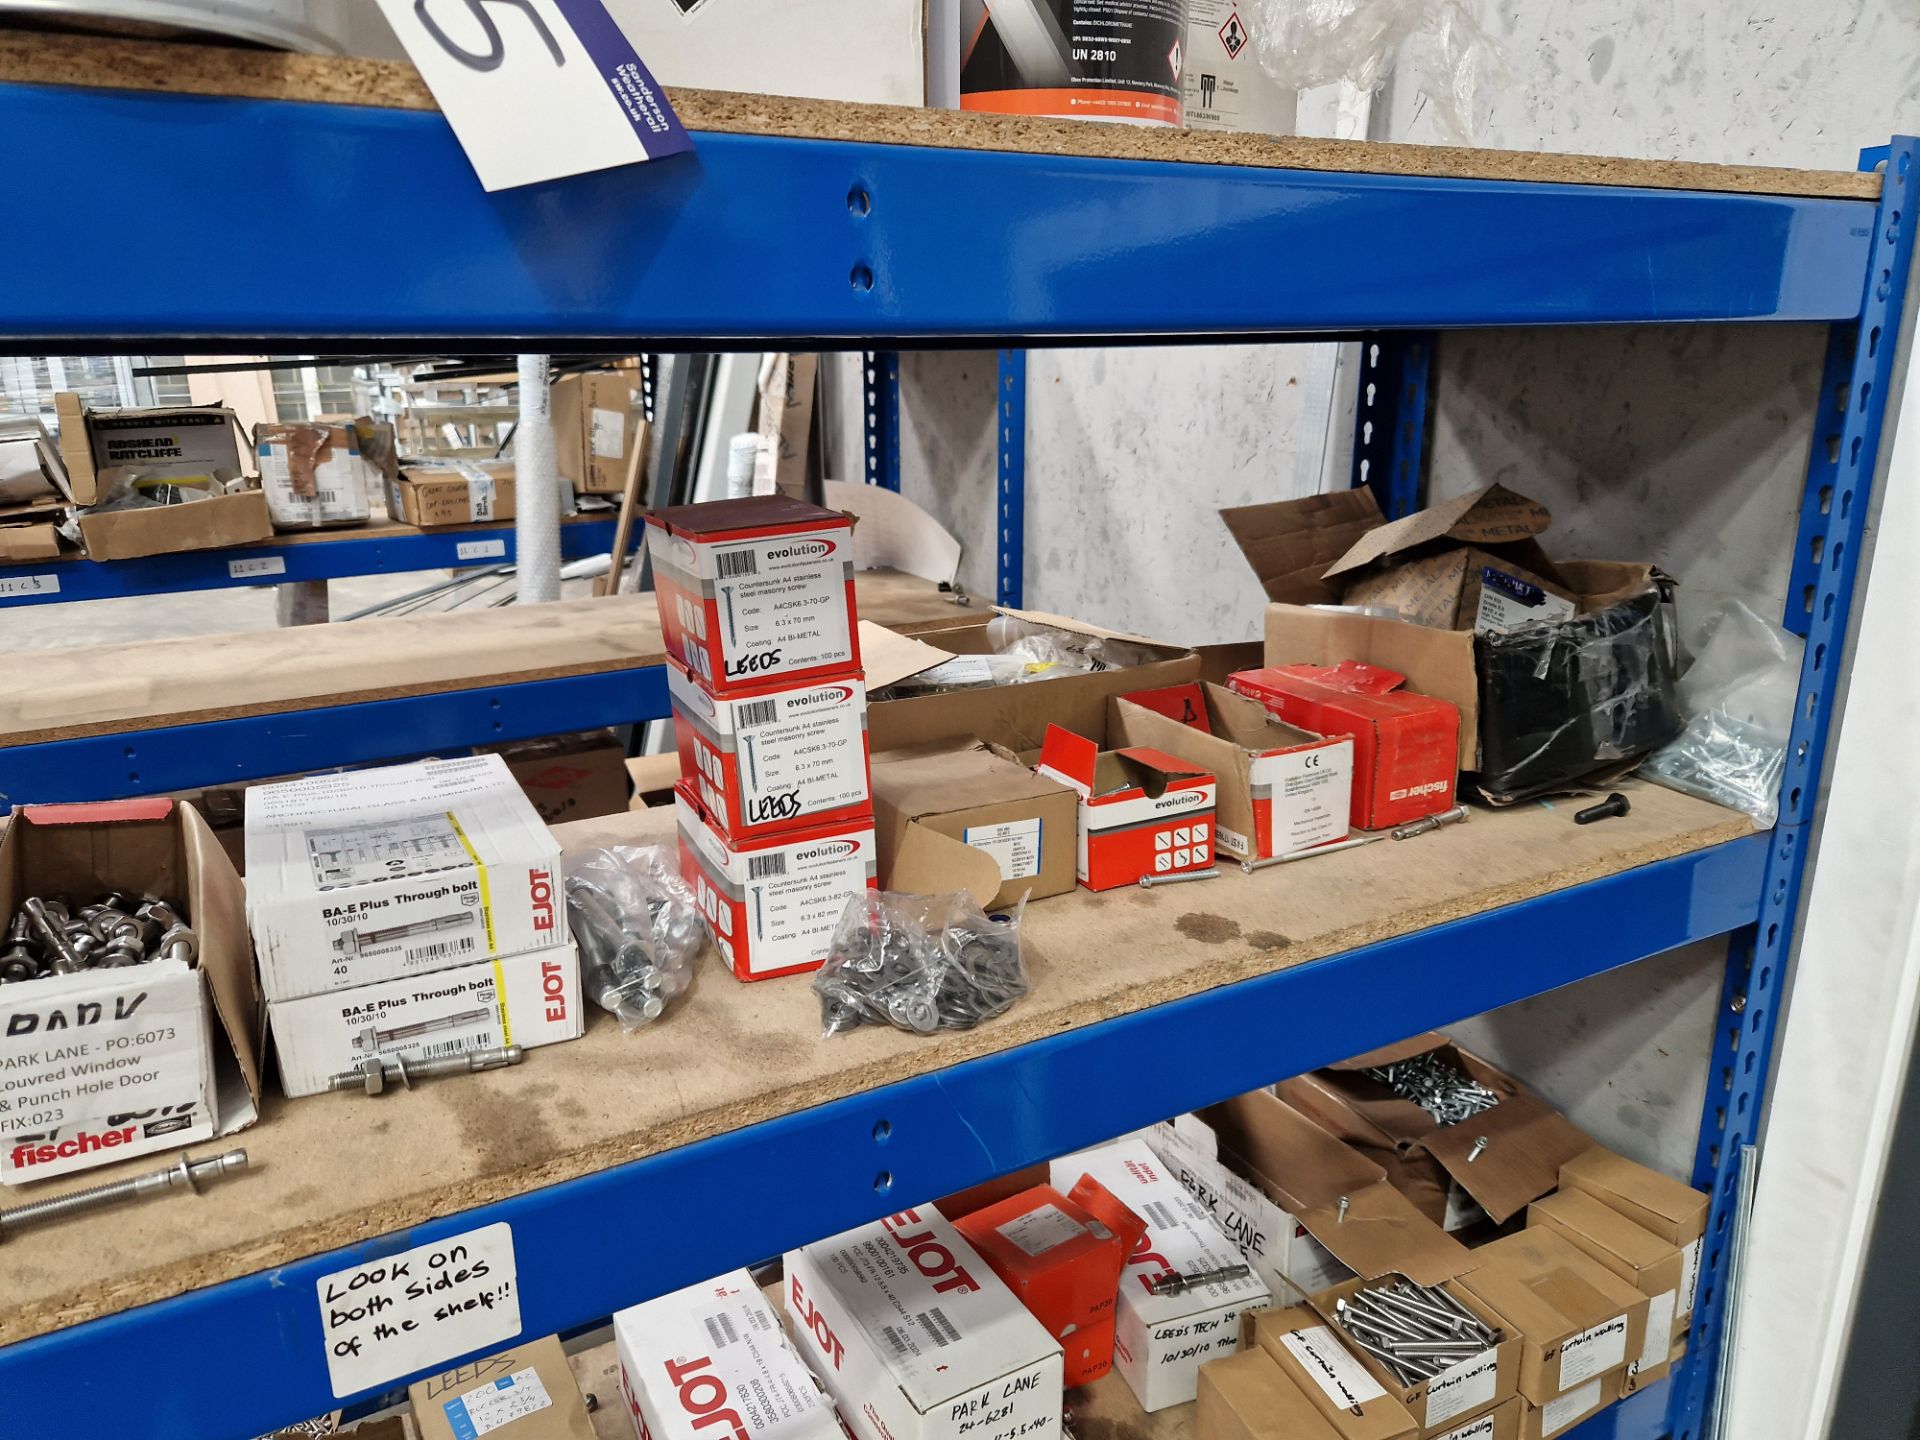 Fixtures and Fittings Contents to One Bay of Racking, including Nuts, Bolts, Rivets, Screws, etc - Image 7 of 7